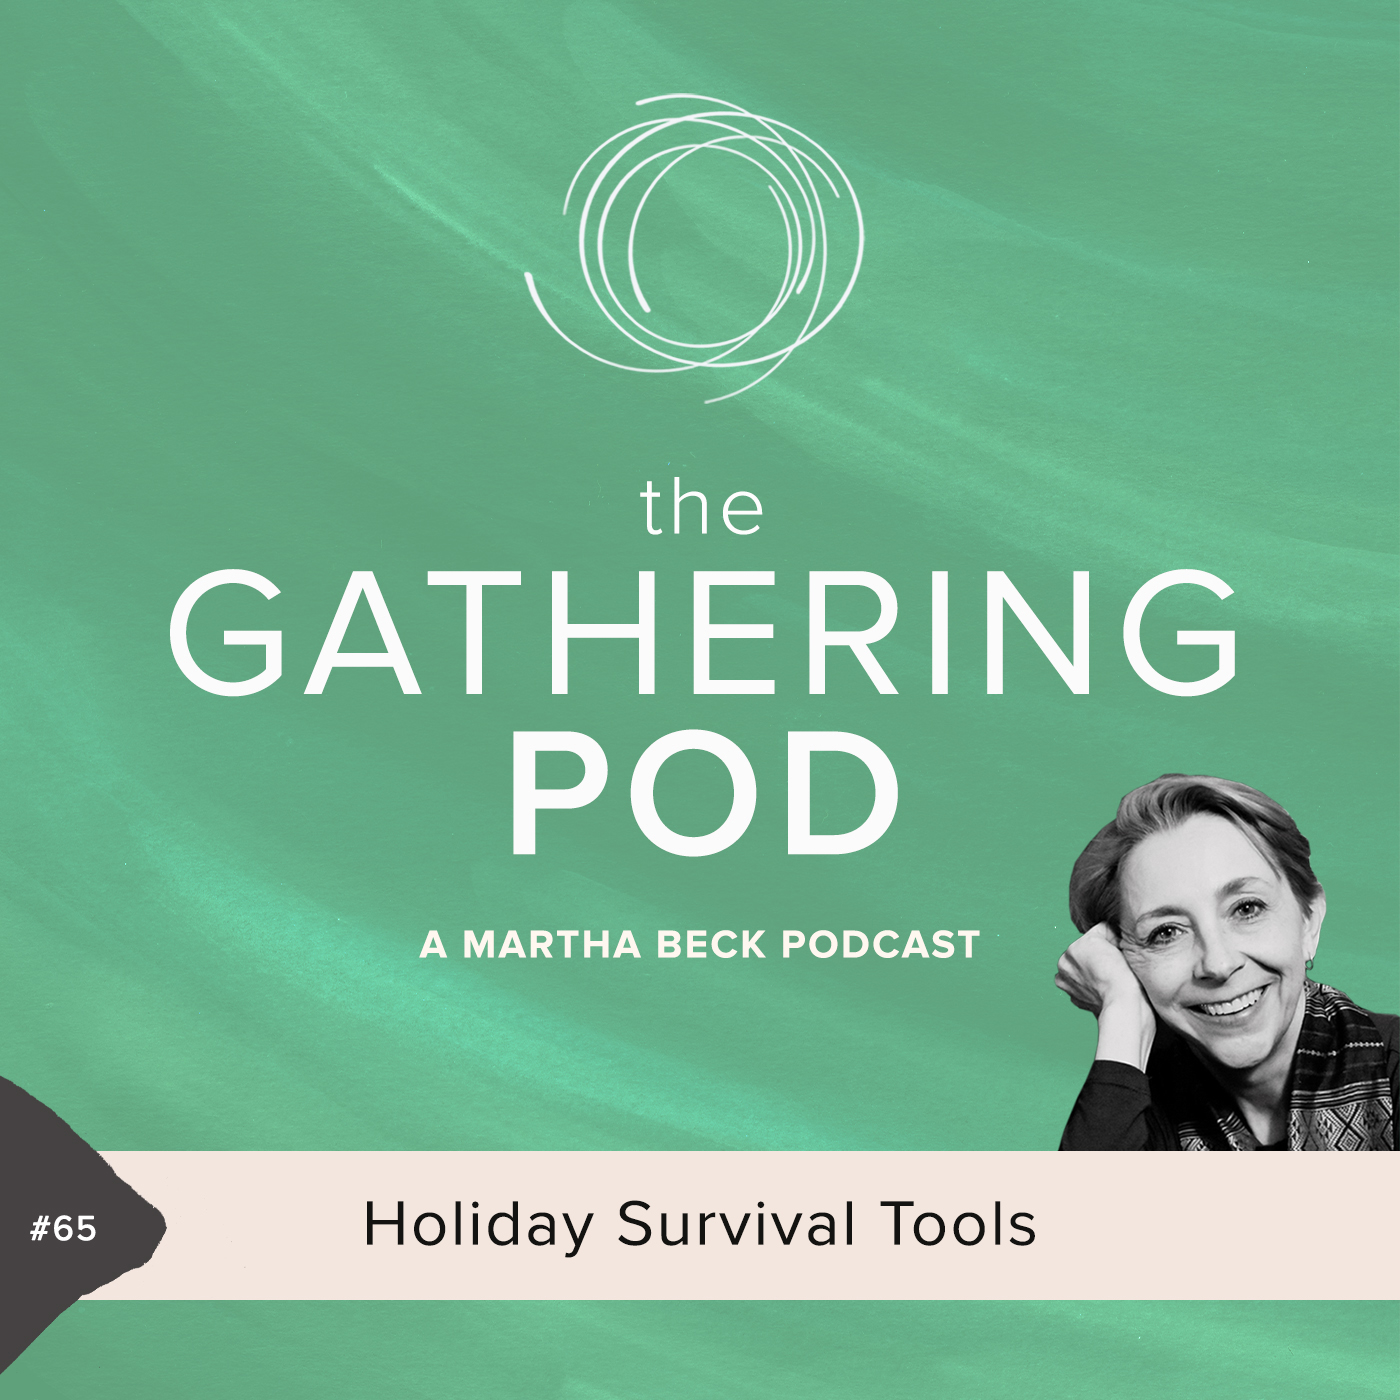 Image for The Gathering Pod A Martha Beck Podcast Episode #65 Holiday Survival Tools